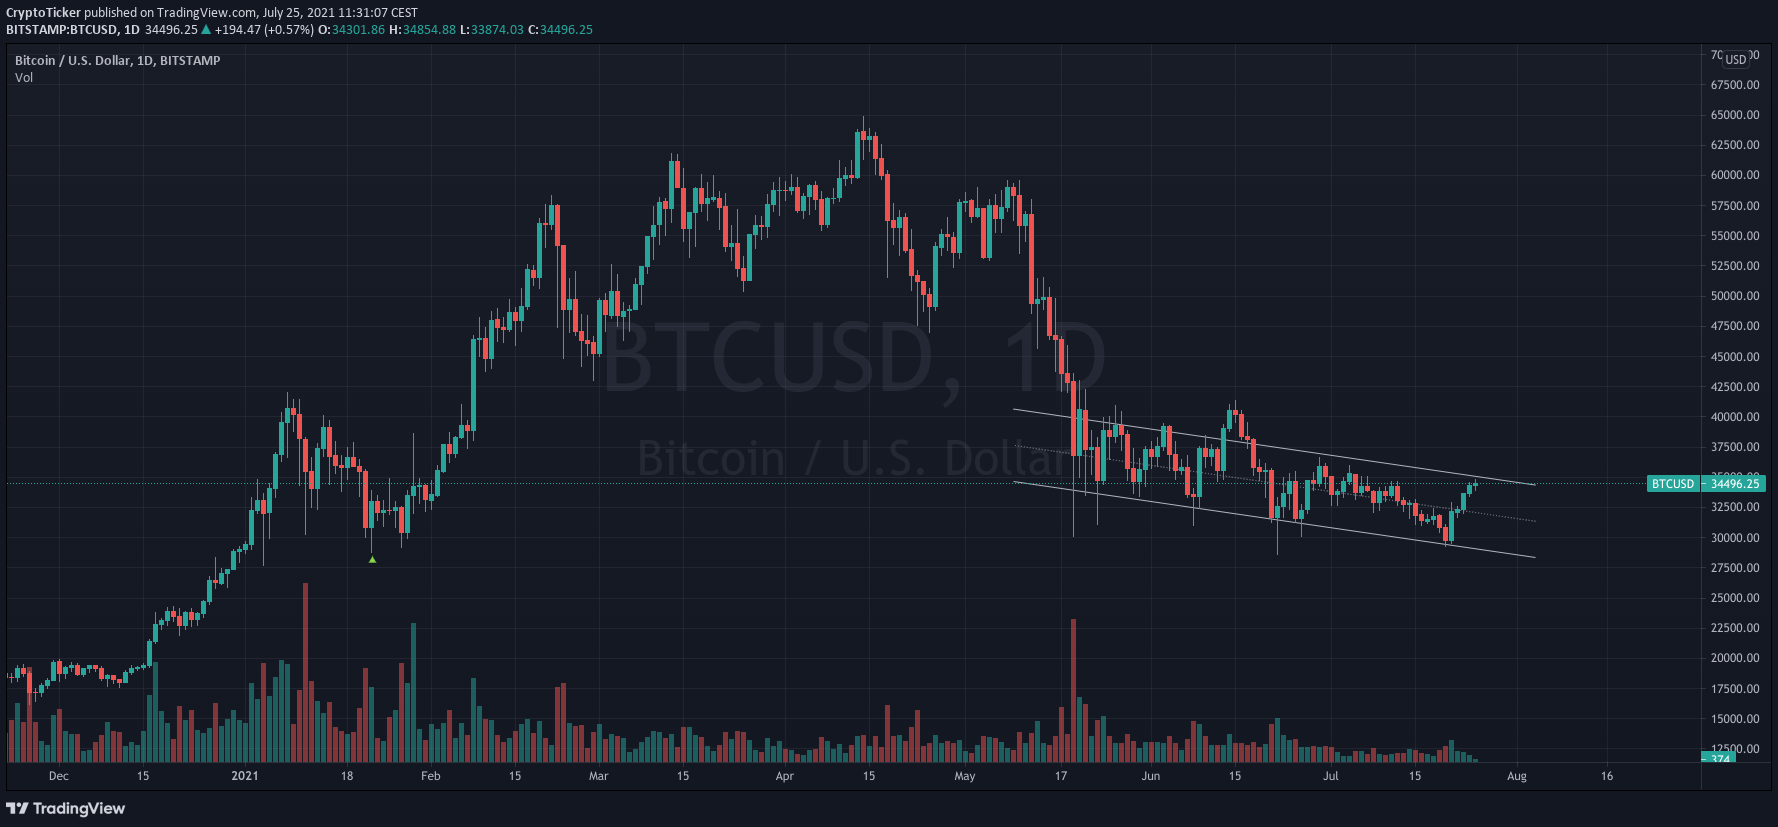 BTC/USD 1-day chart showing a potential trend reversal for BTC